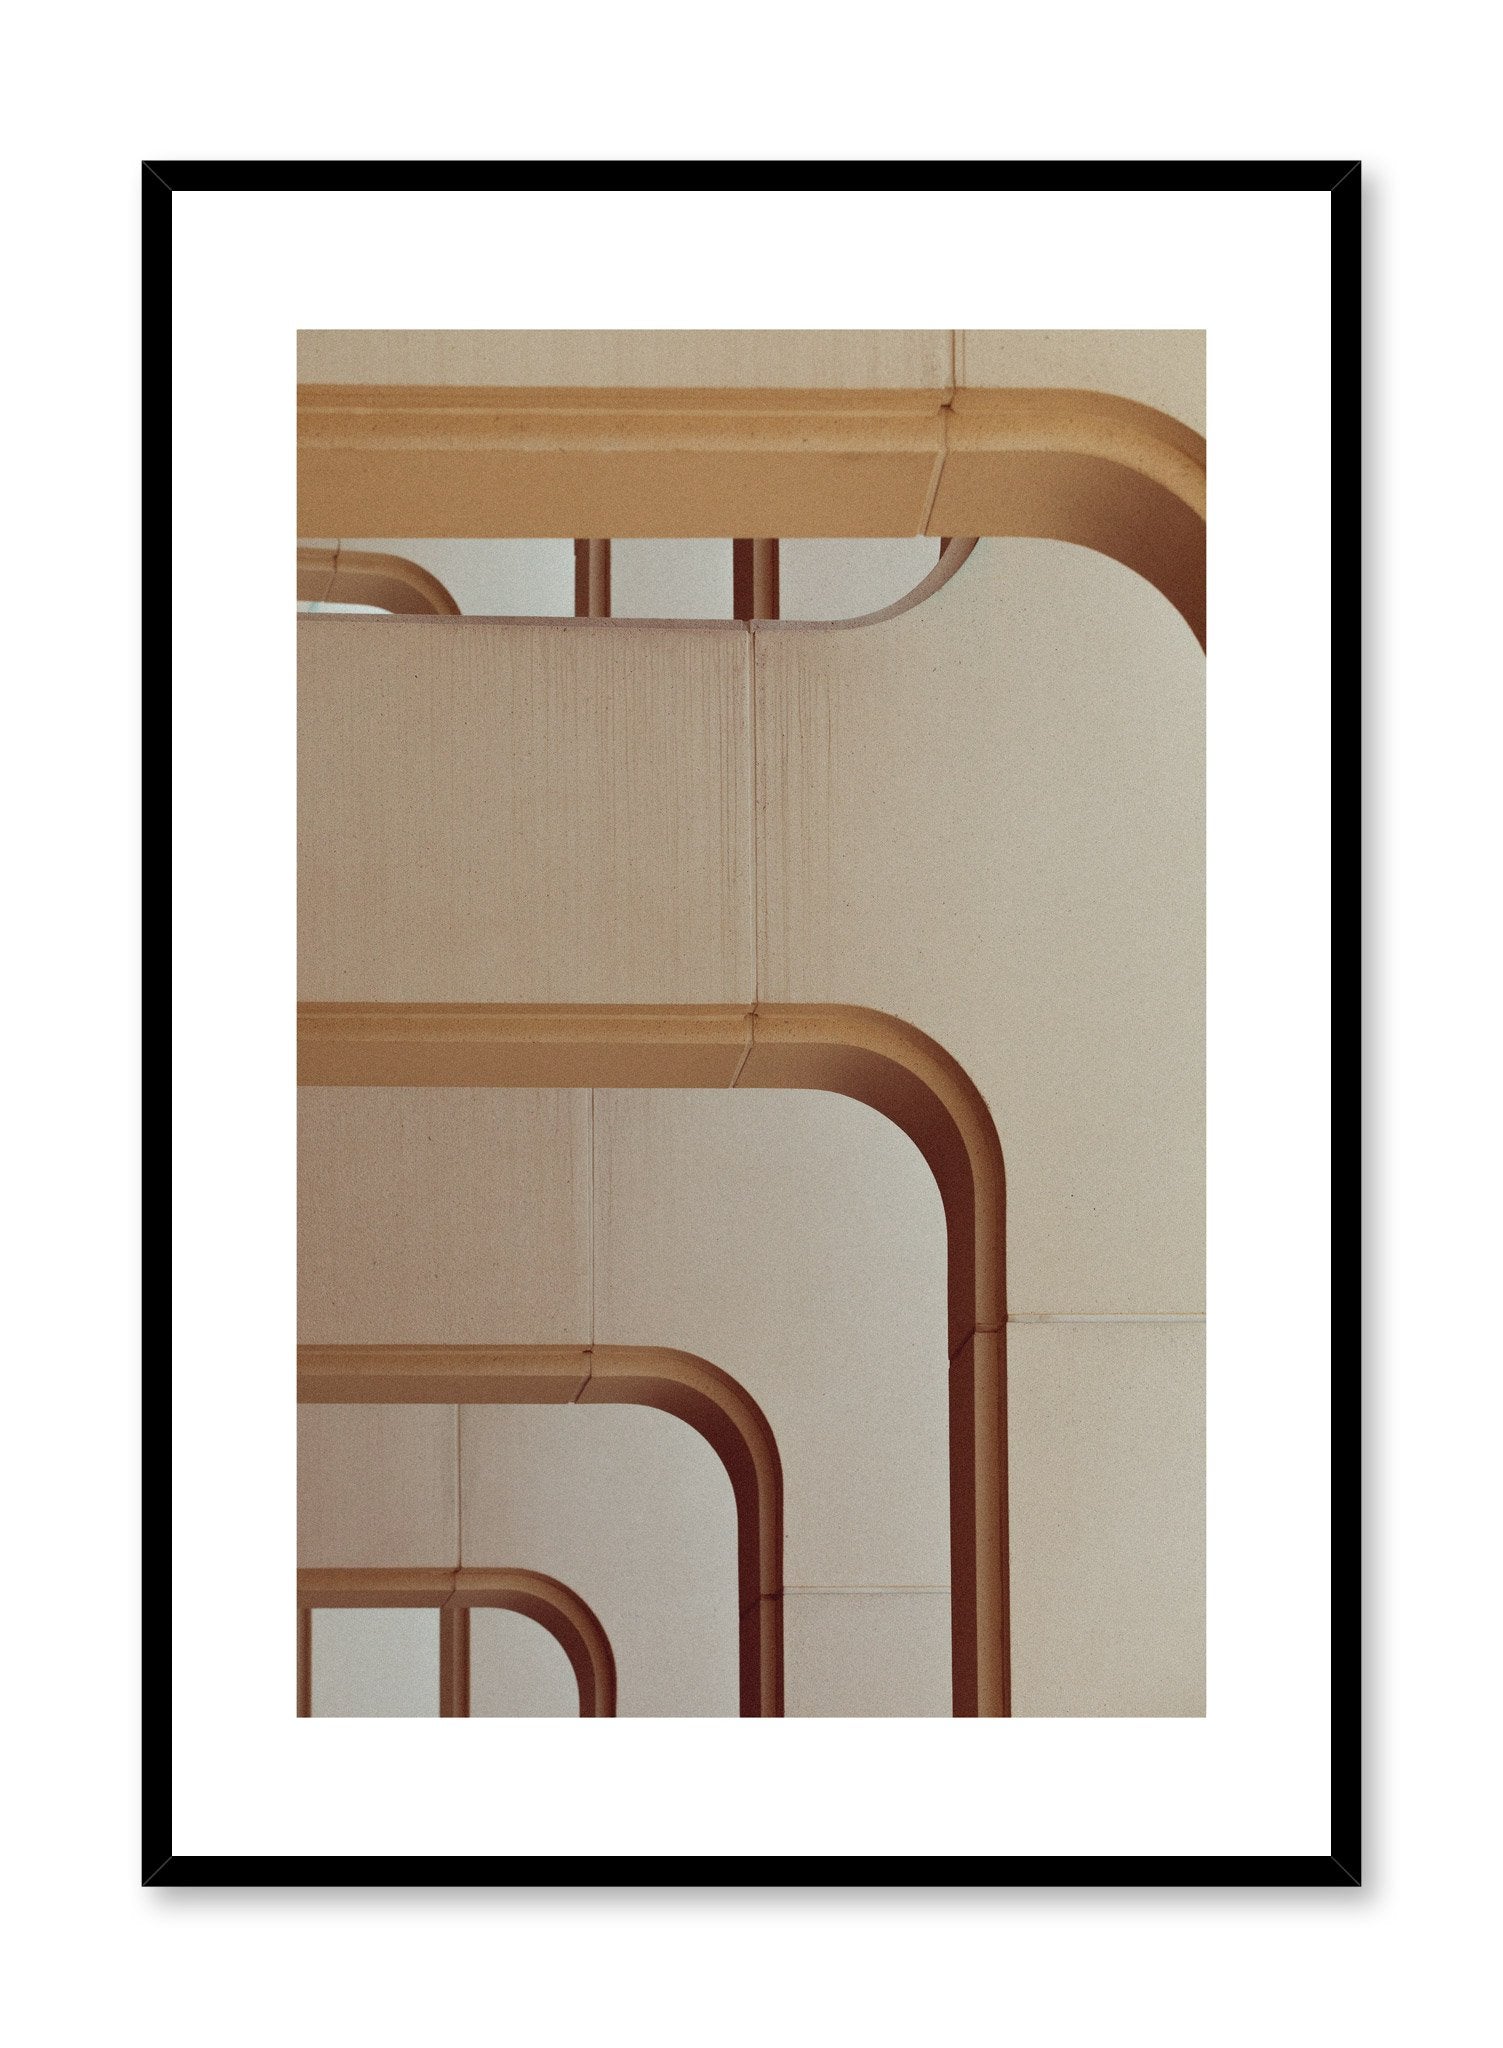 Modern minimalist poster by Opposite Wall with photography of building arches